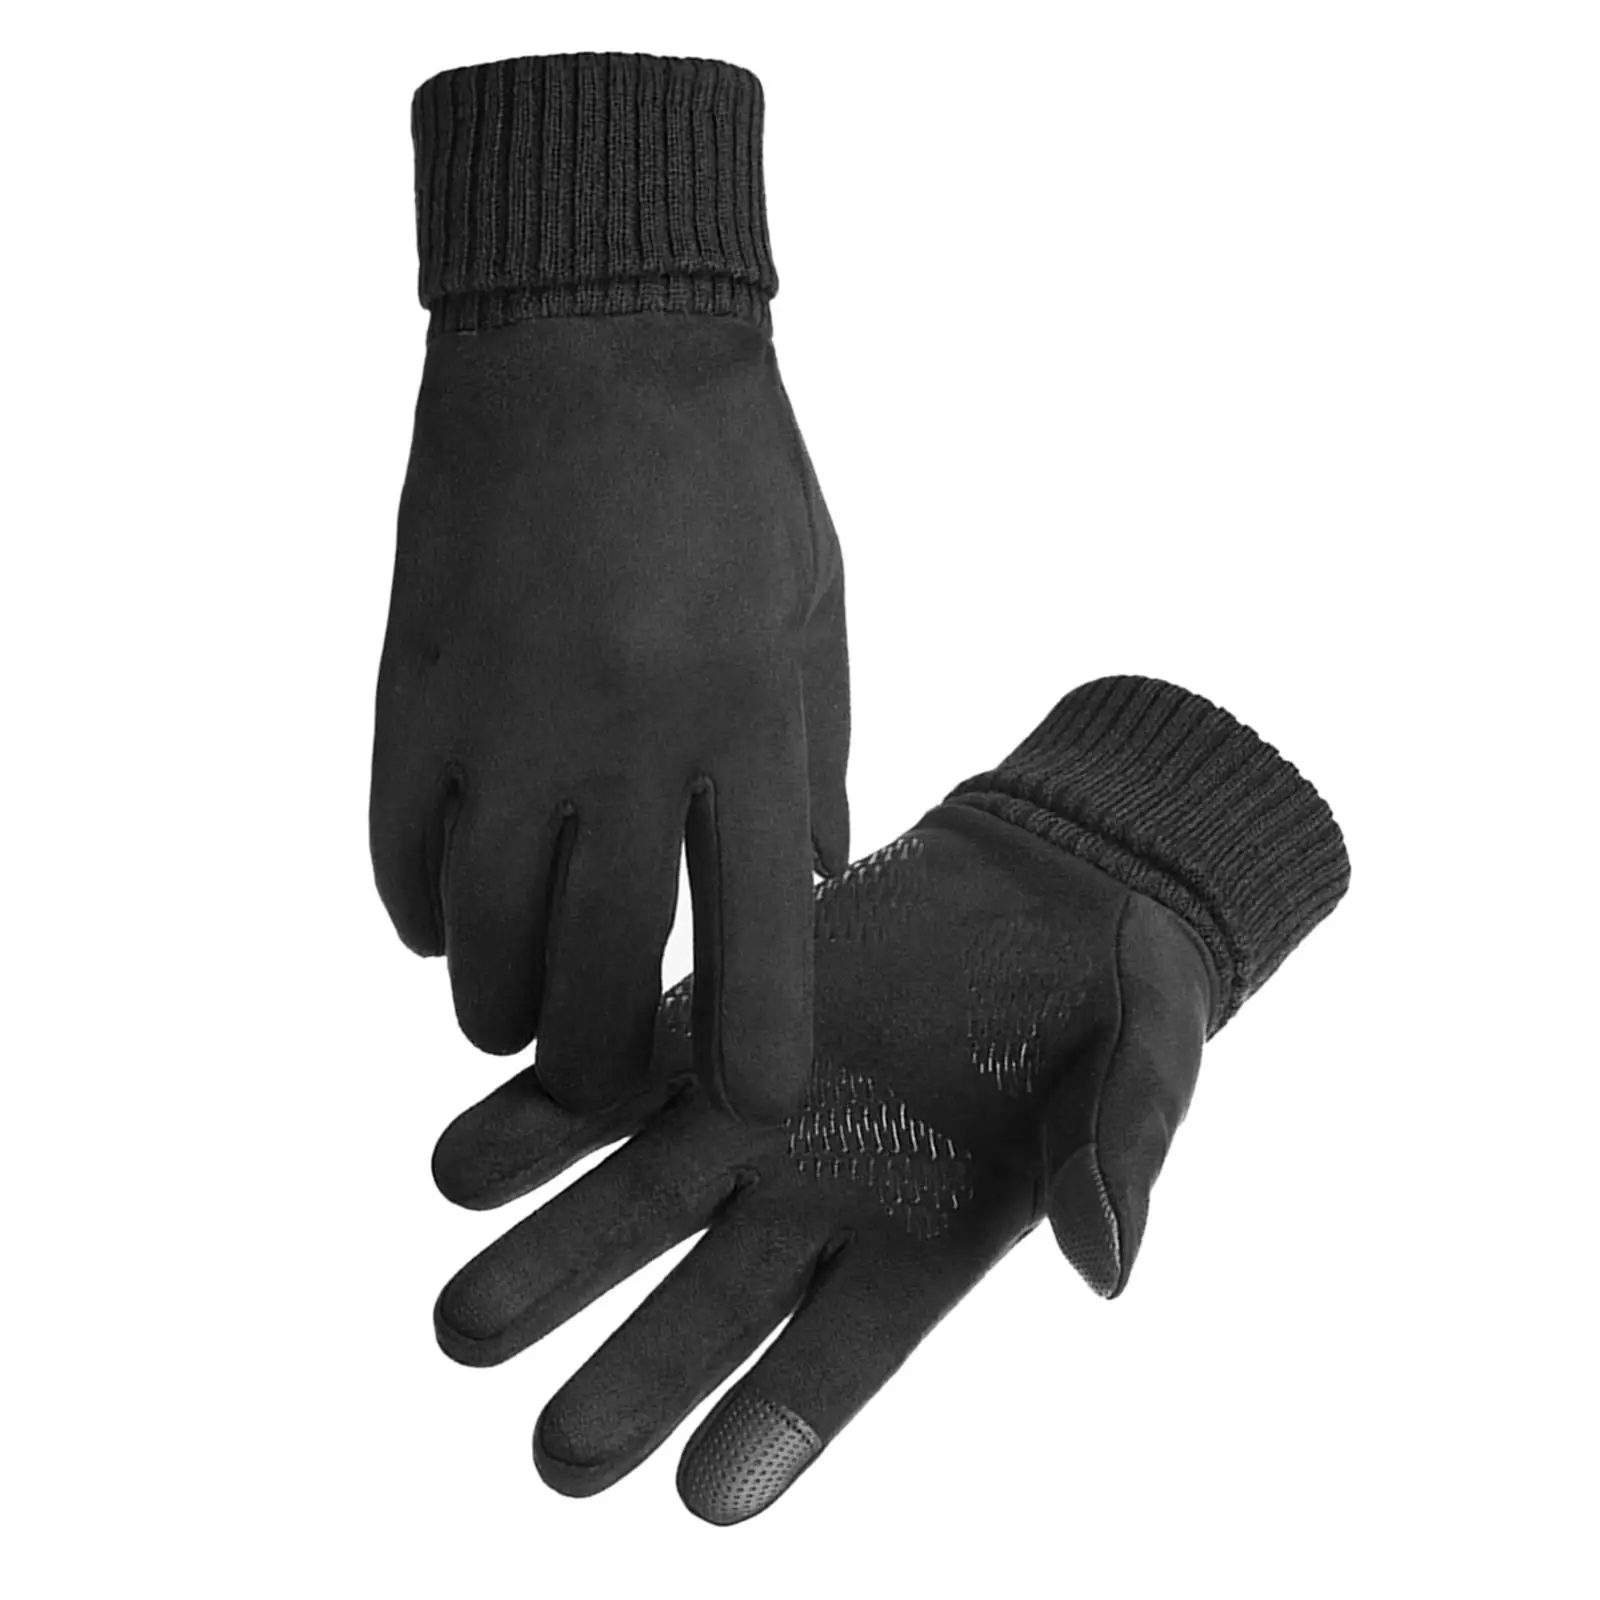 Winter Warm Gloves Full Finger Comfortable Lightweight Thermal Cycling Gloves for Men Hiking Skiing Outdoor Activities Running